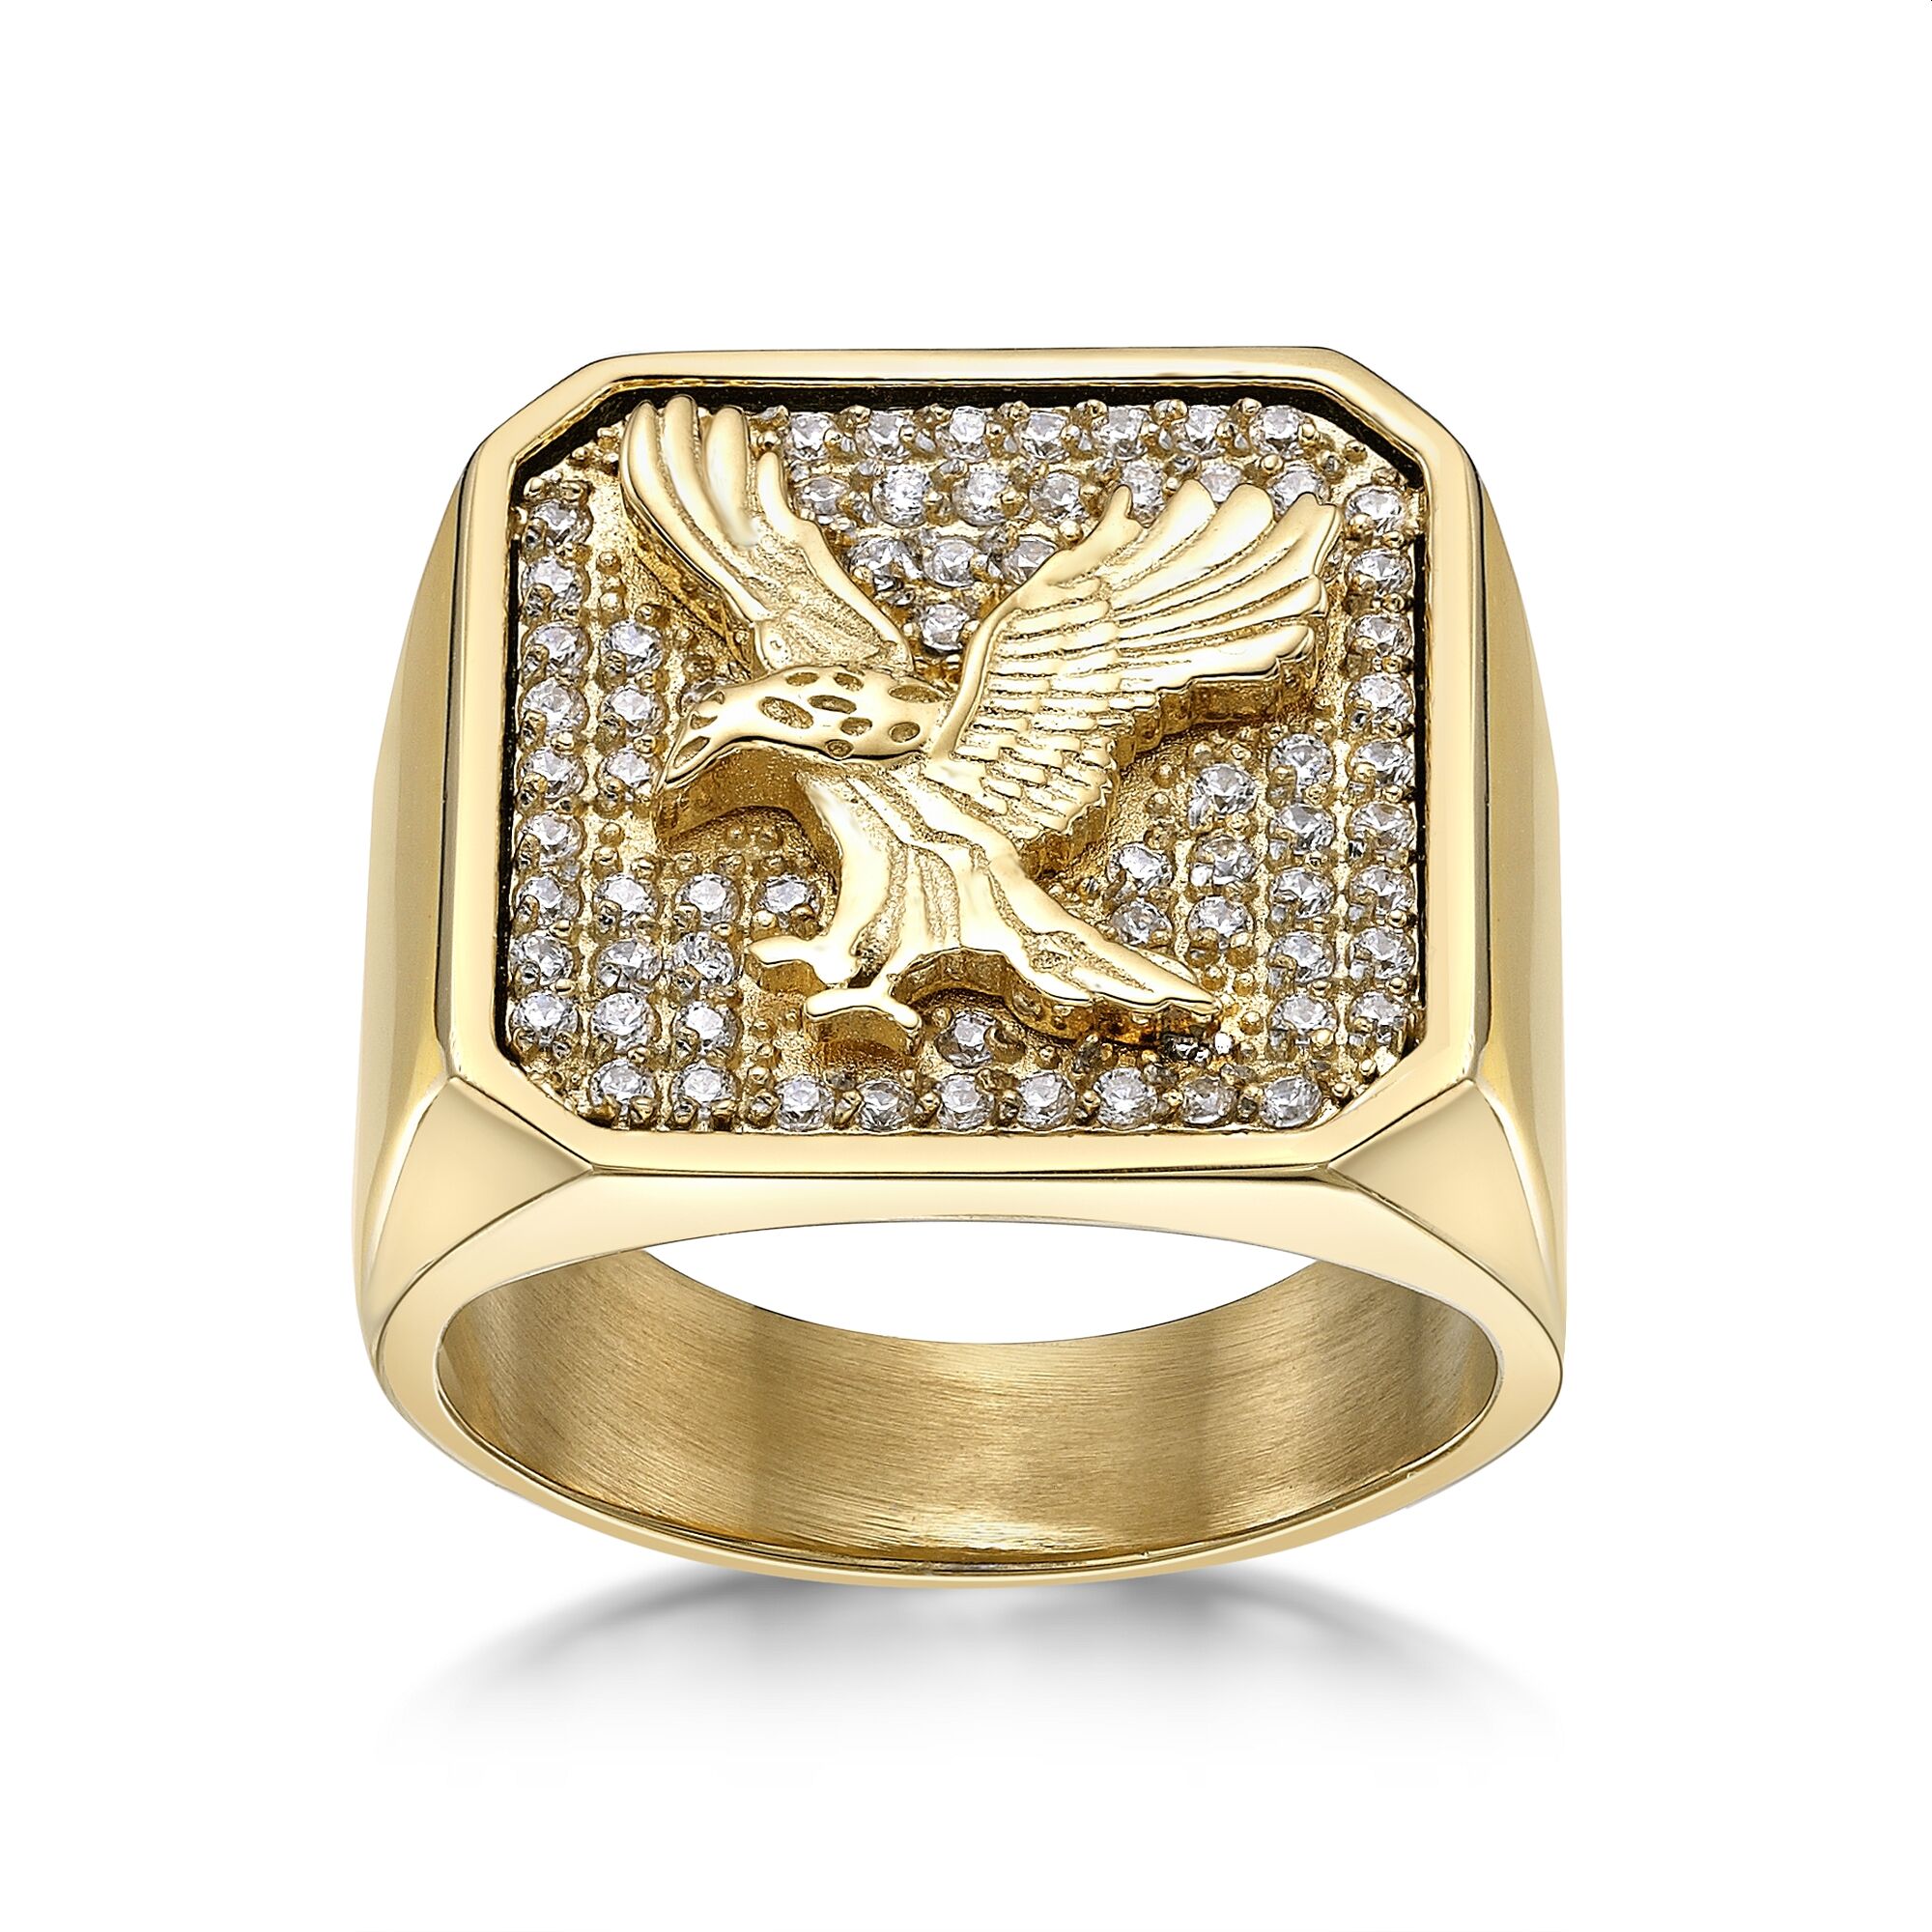 LYNX Men's Gold Tone Stainless Steel Cubic Zirconia Eagle Ring